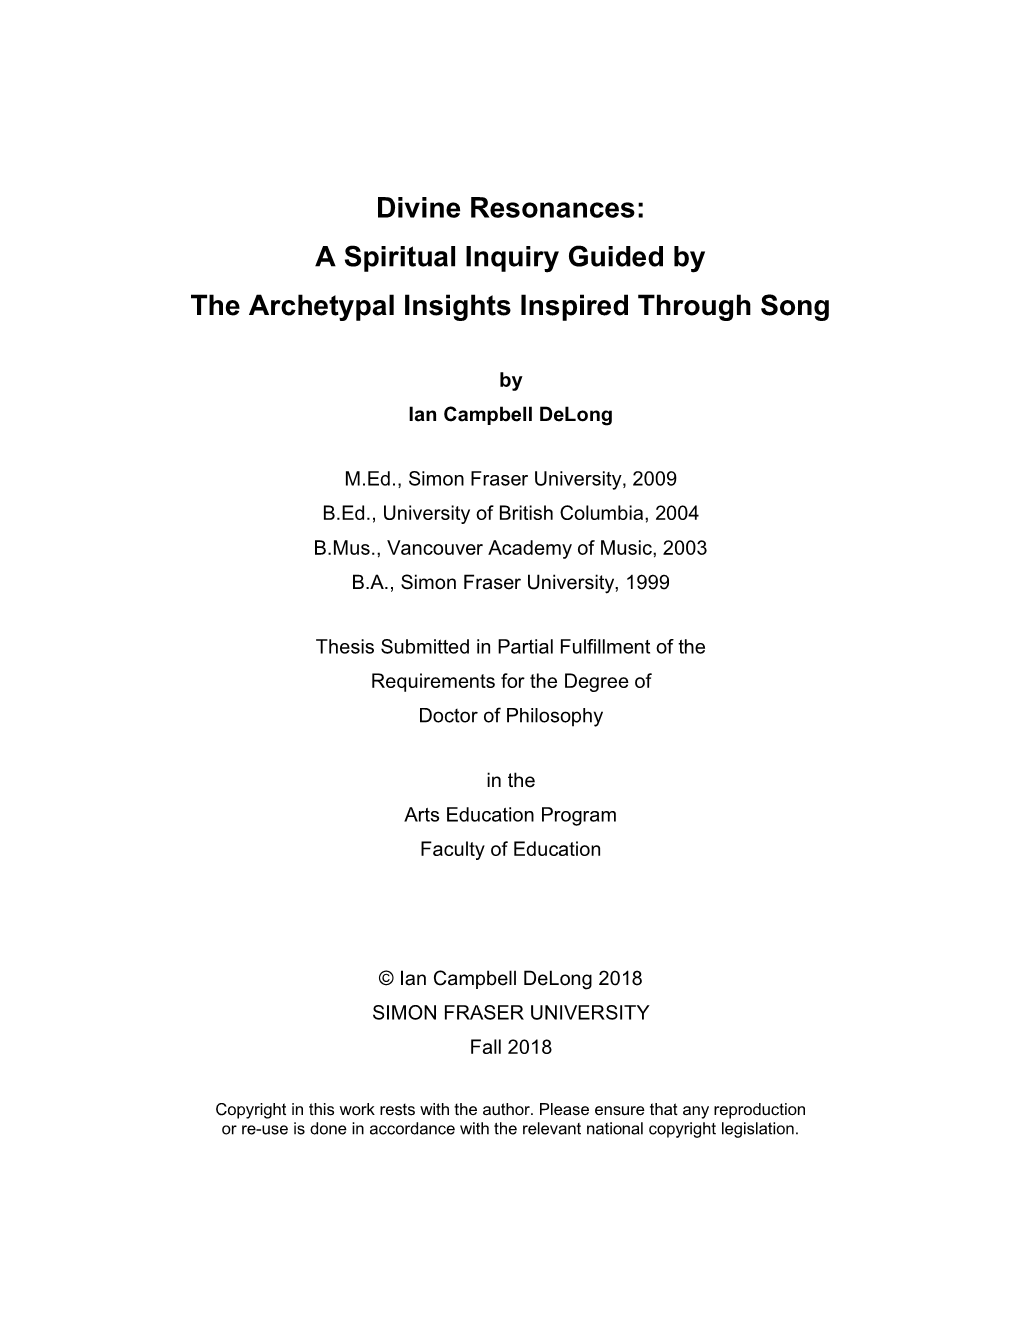 Divine Resonances: a Spiritual Inquiry Guided by the Archetypal Insights Inspired Through Song